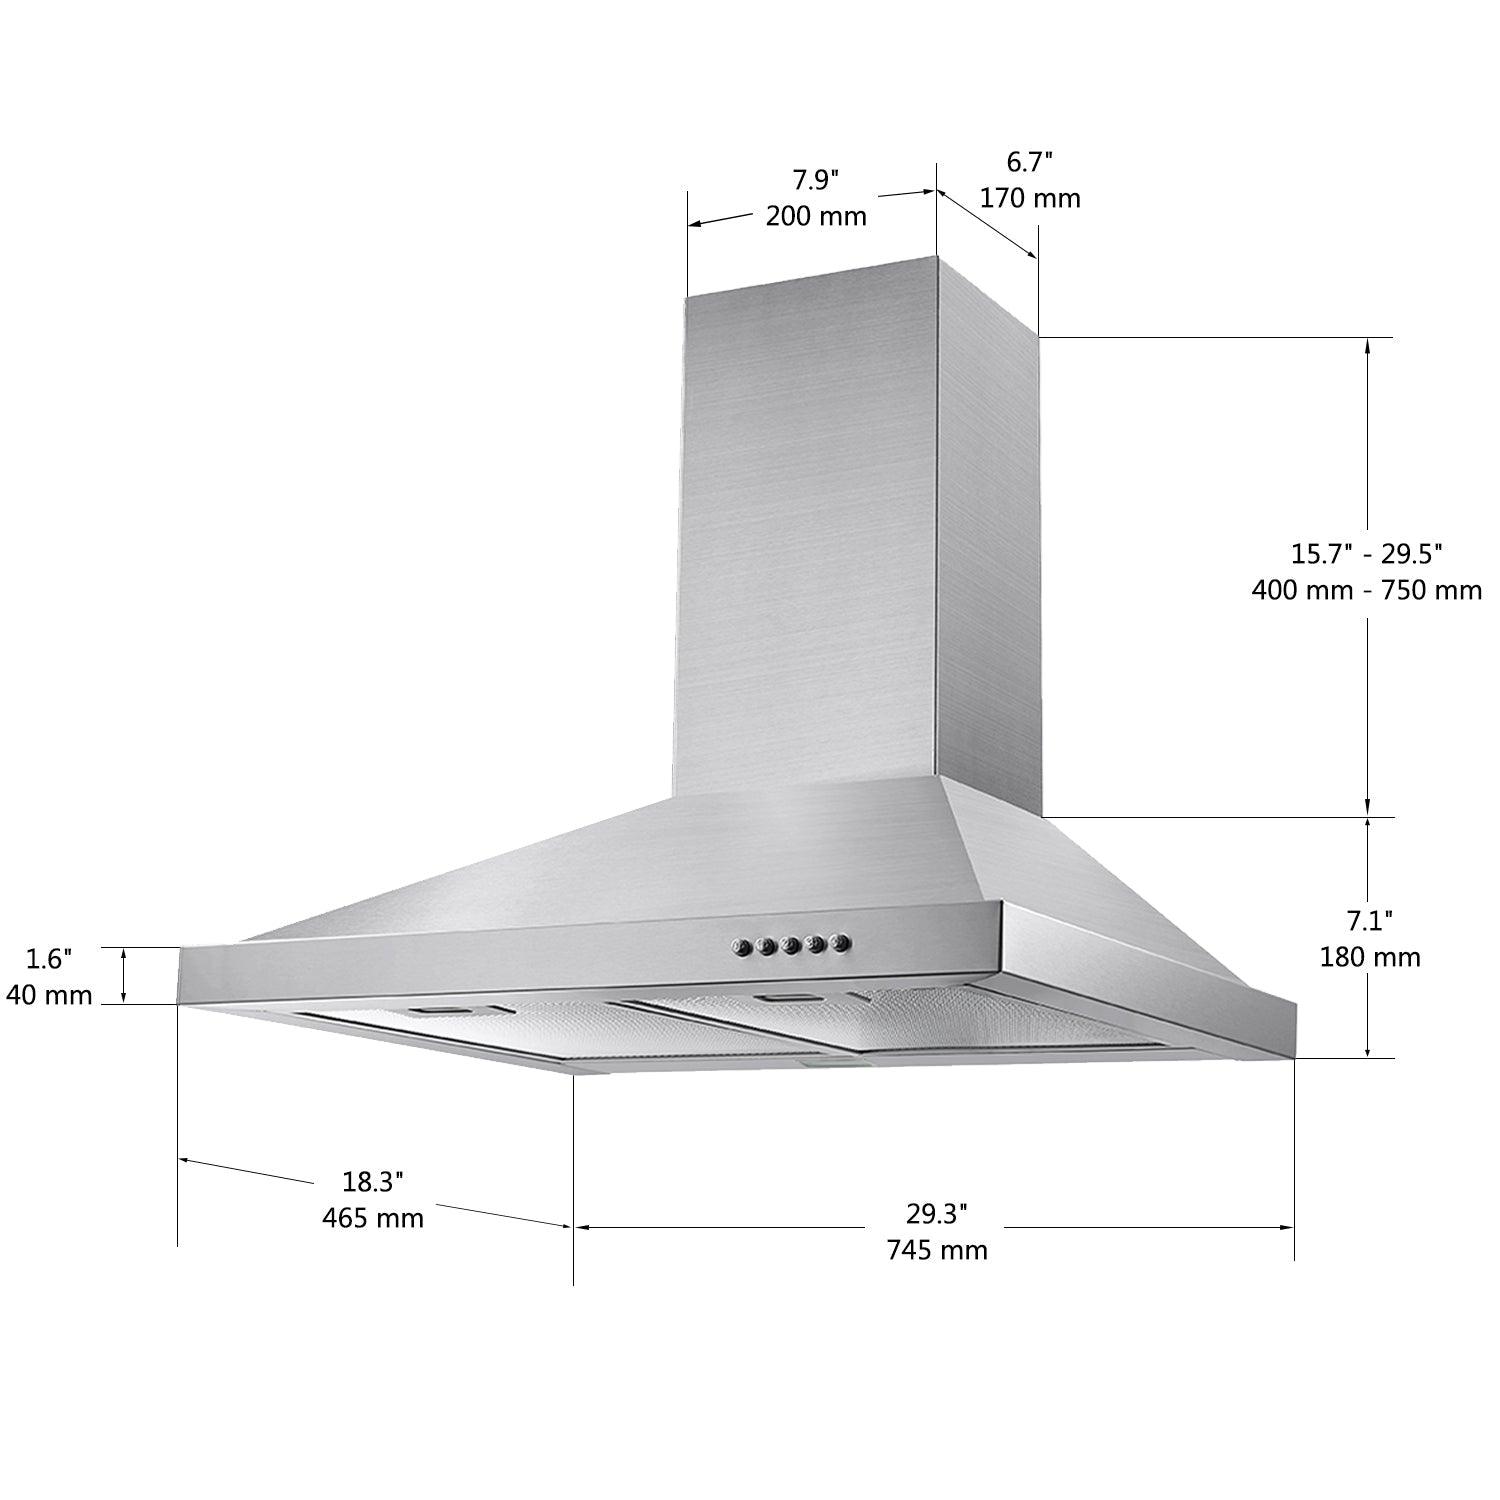 Tieasy 24 inch Wall Mount Range Hood 450 CFM Ducted/Ductless with 3 Speed Exhaust Fan - ZMG-0160B